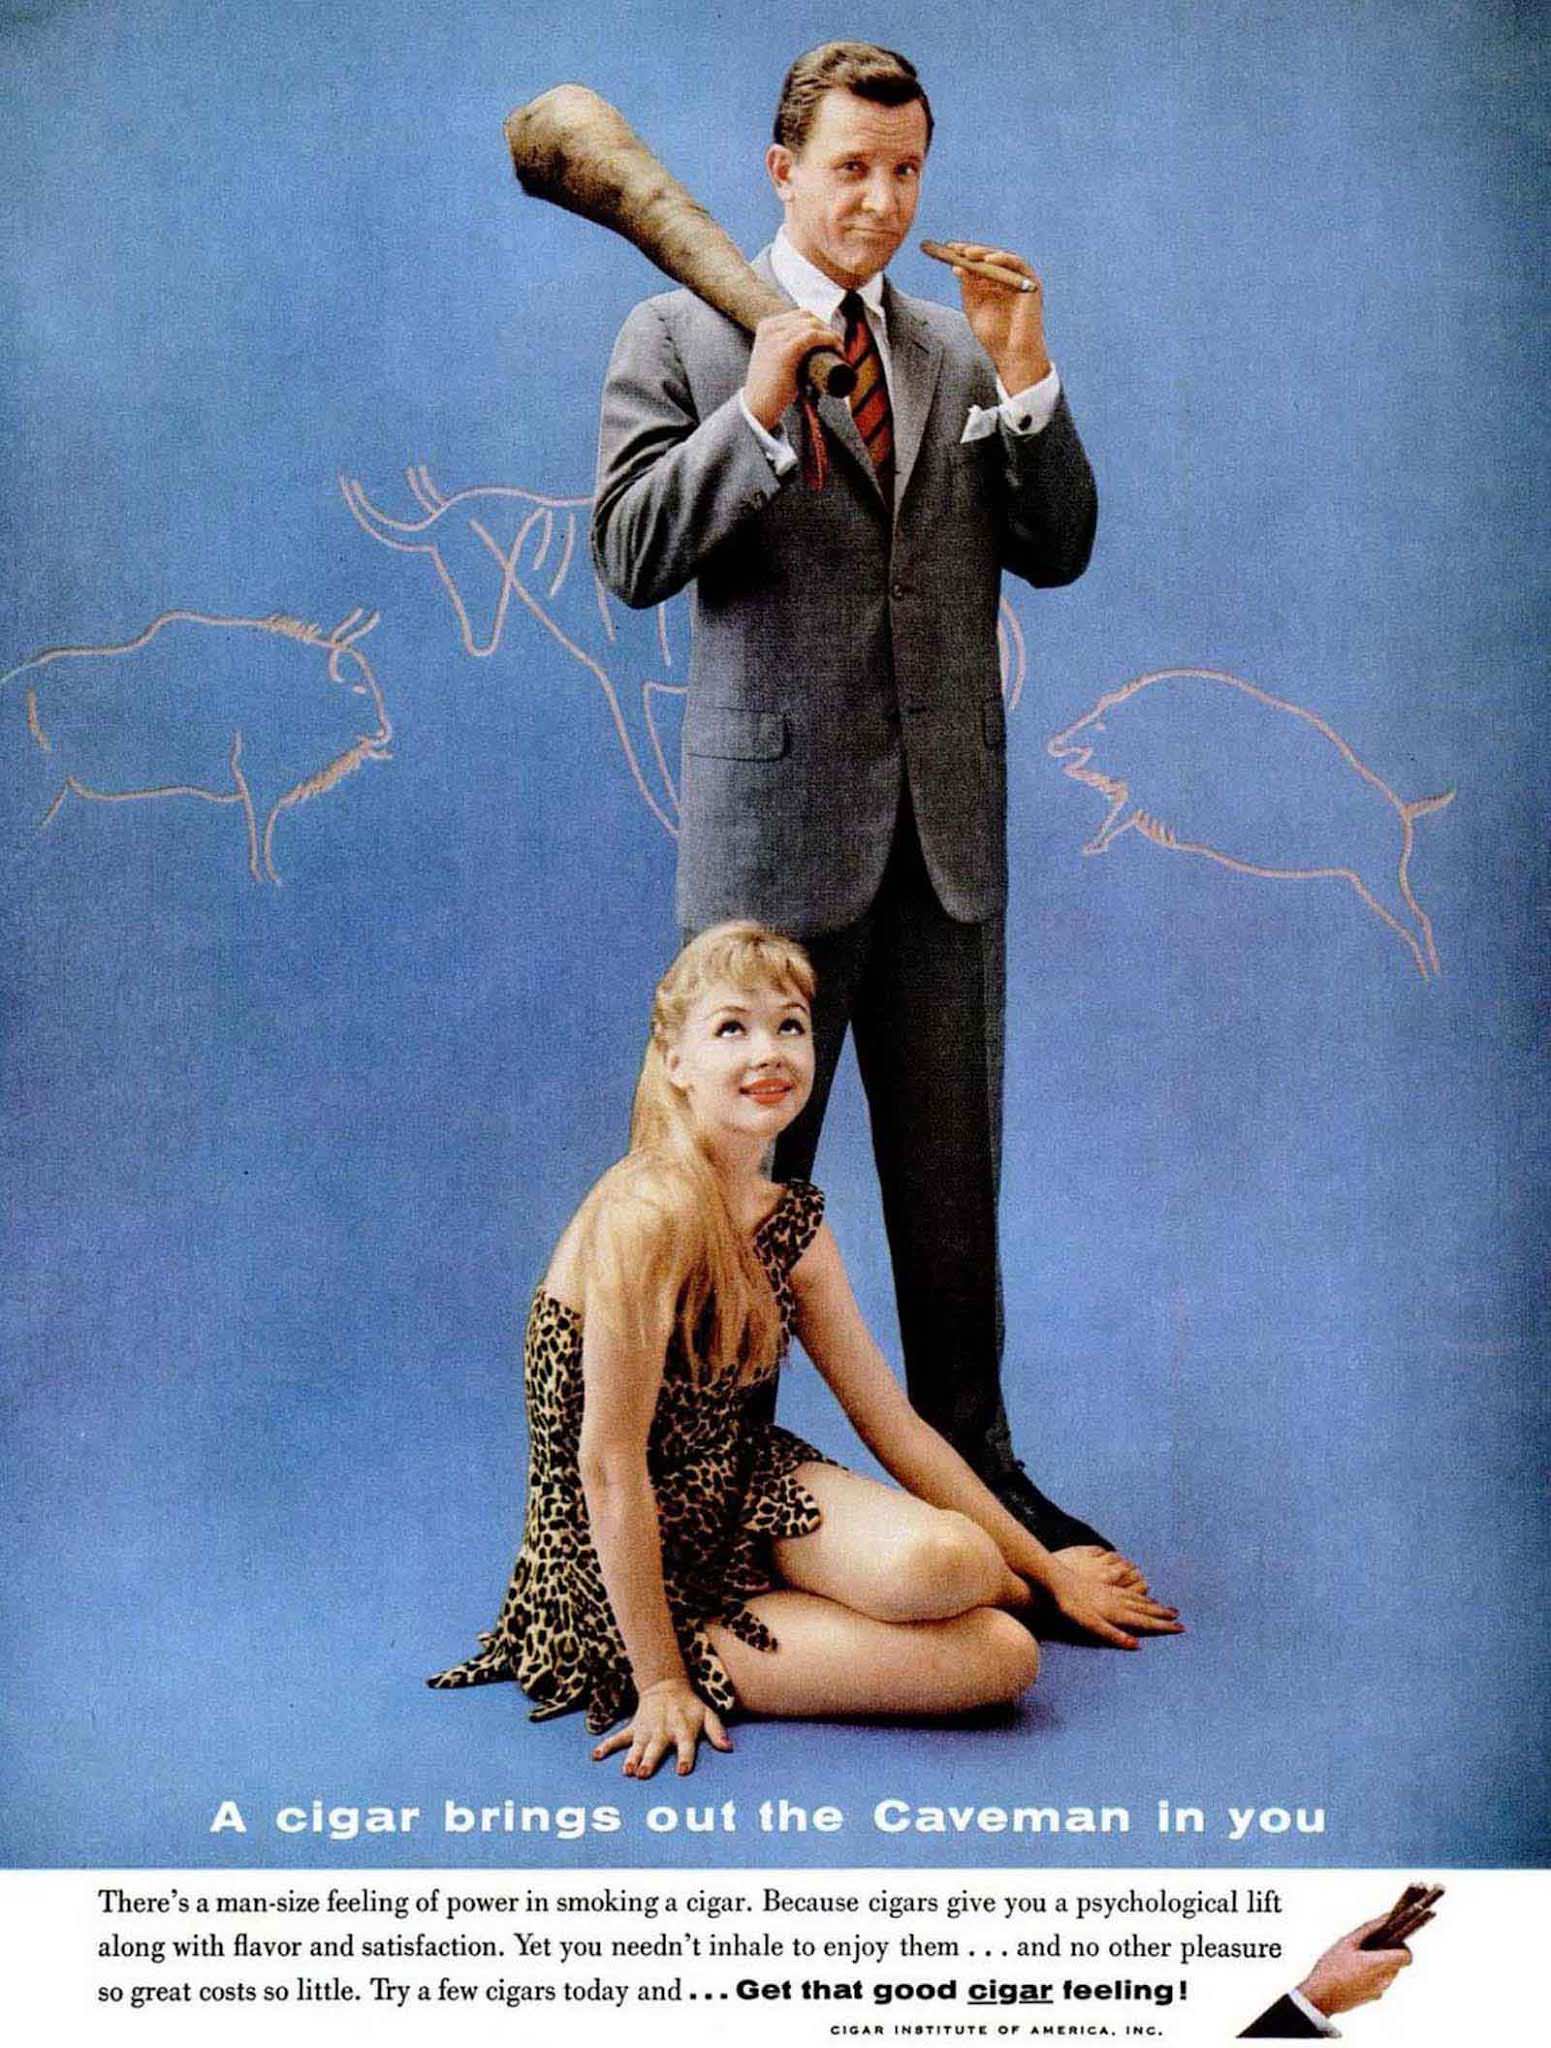 A cigar brings out the caveman in you.There’s a man-size feeling of power in smoking a cigar, 1959